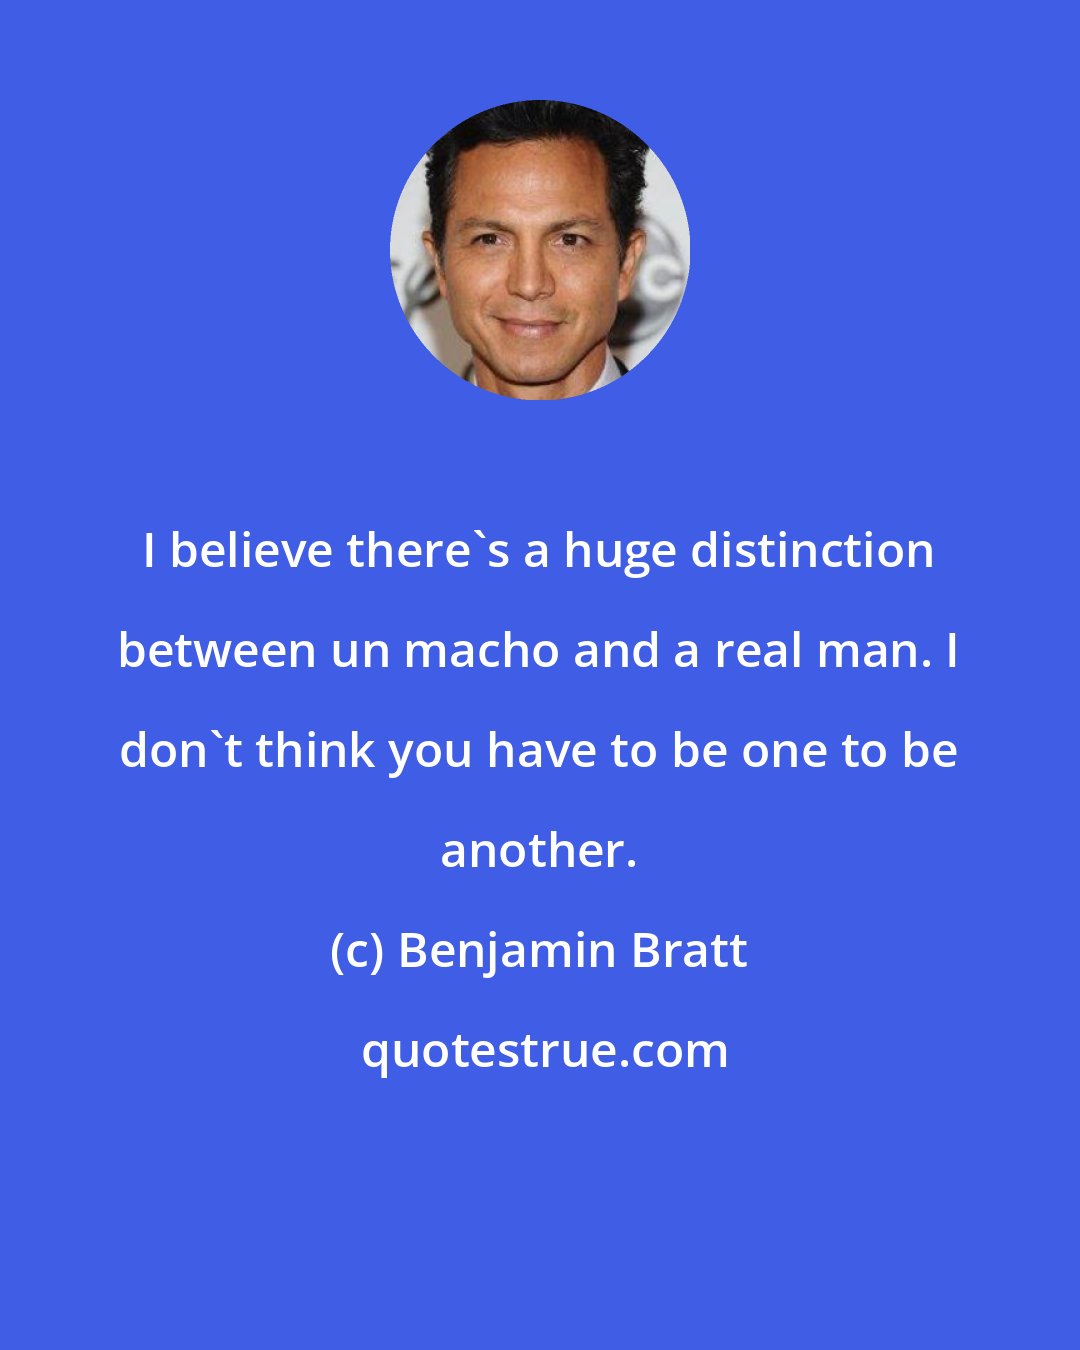 Benjamin Bratt: I believe there's a huge distinction between un macho and a real man. I don't think you have to be one to be another.